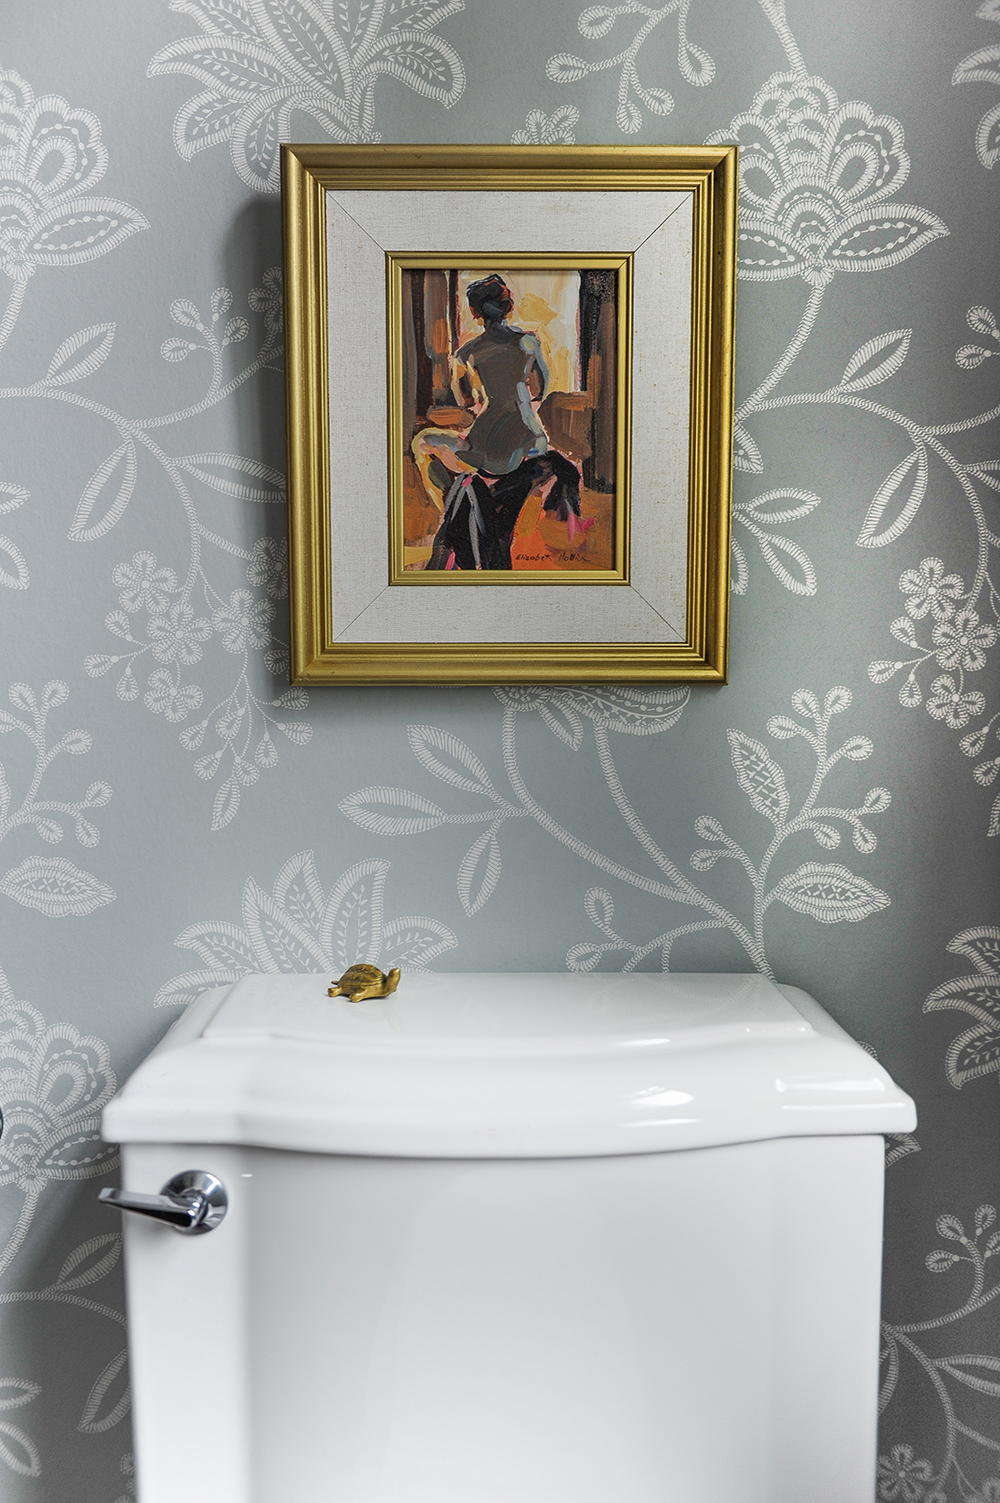 A powder room with sumptuous floral wallpaper and unexpected accents.